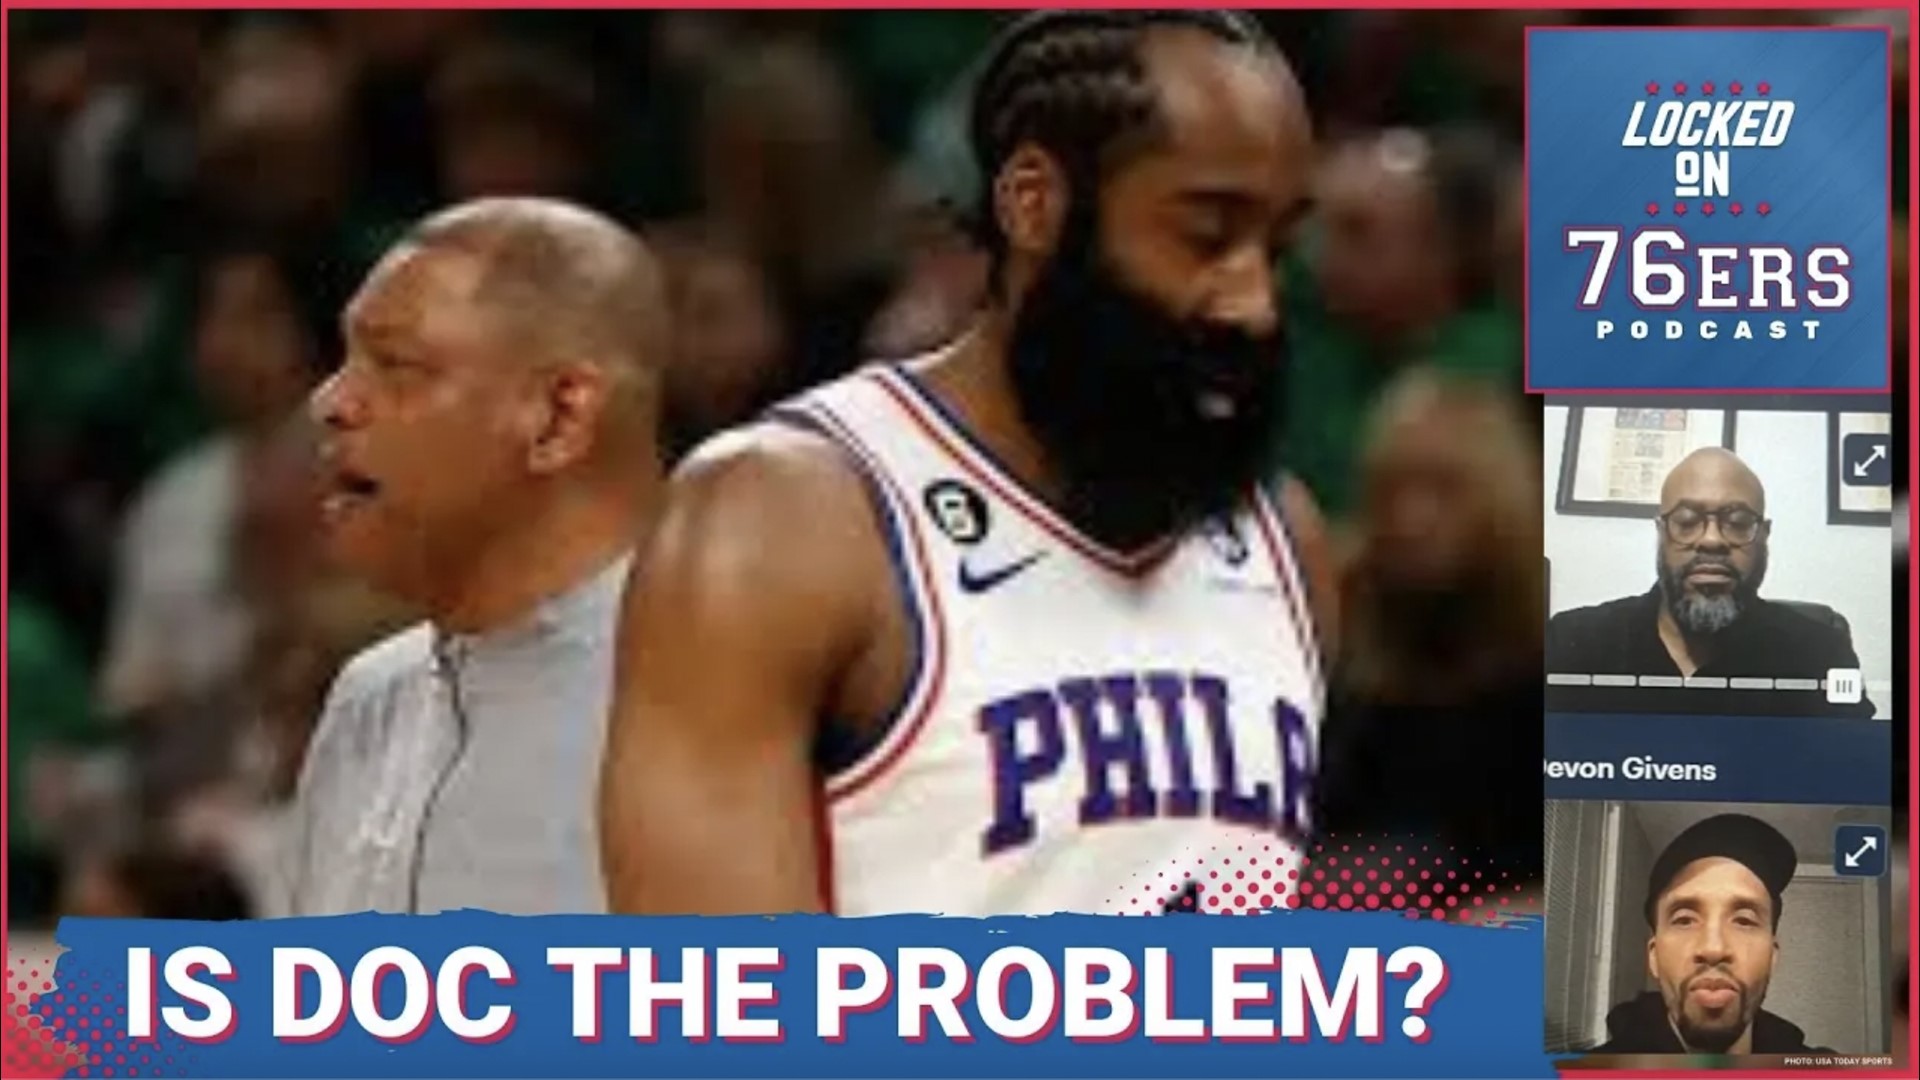 The expectation is that Doc Rivers will be fired after coaching the 76ers for three seasons. But it is warranted? Keith Pompey discusses that.